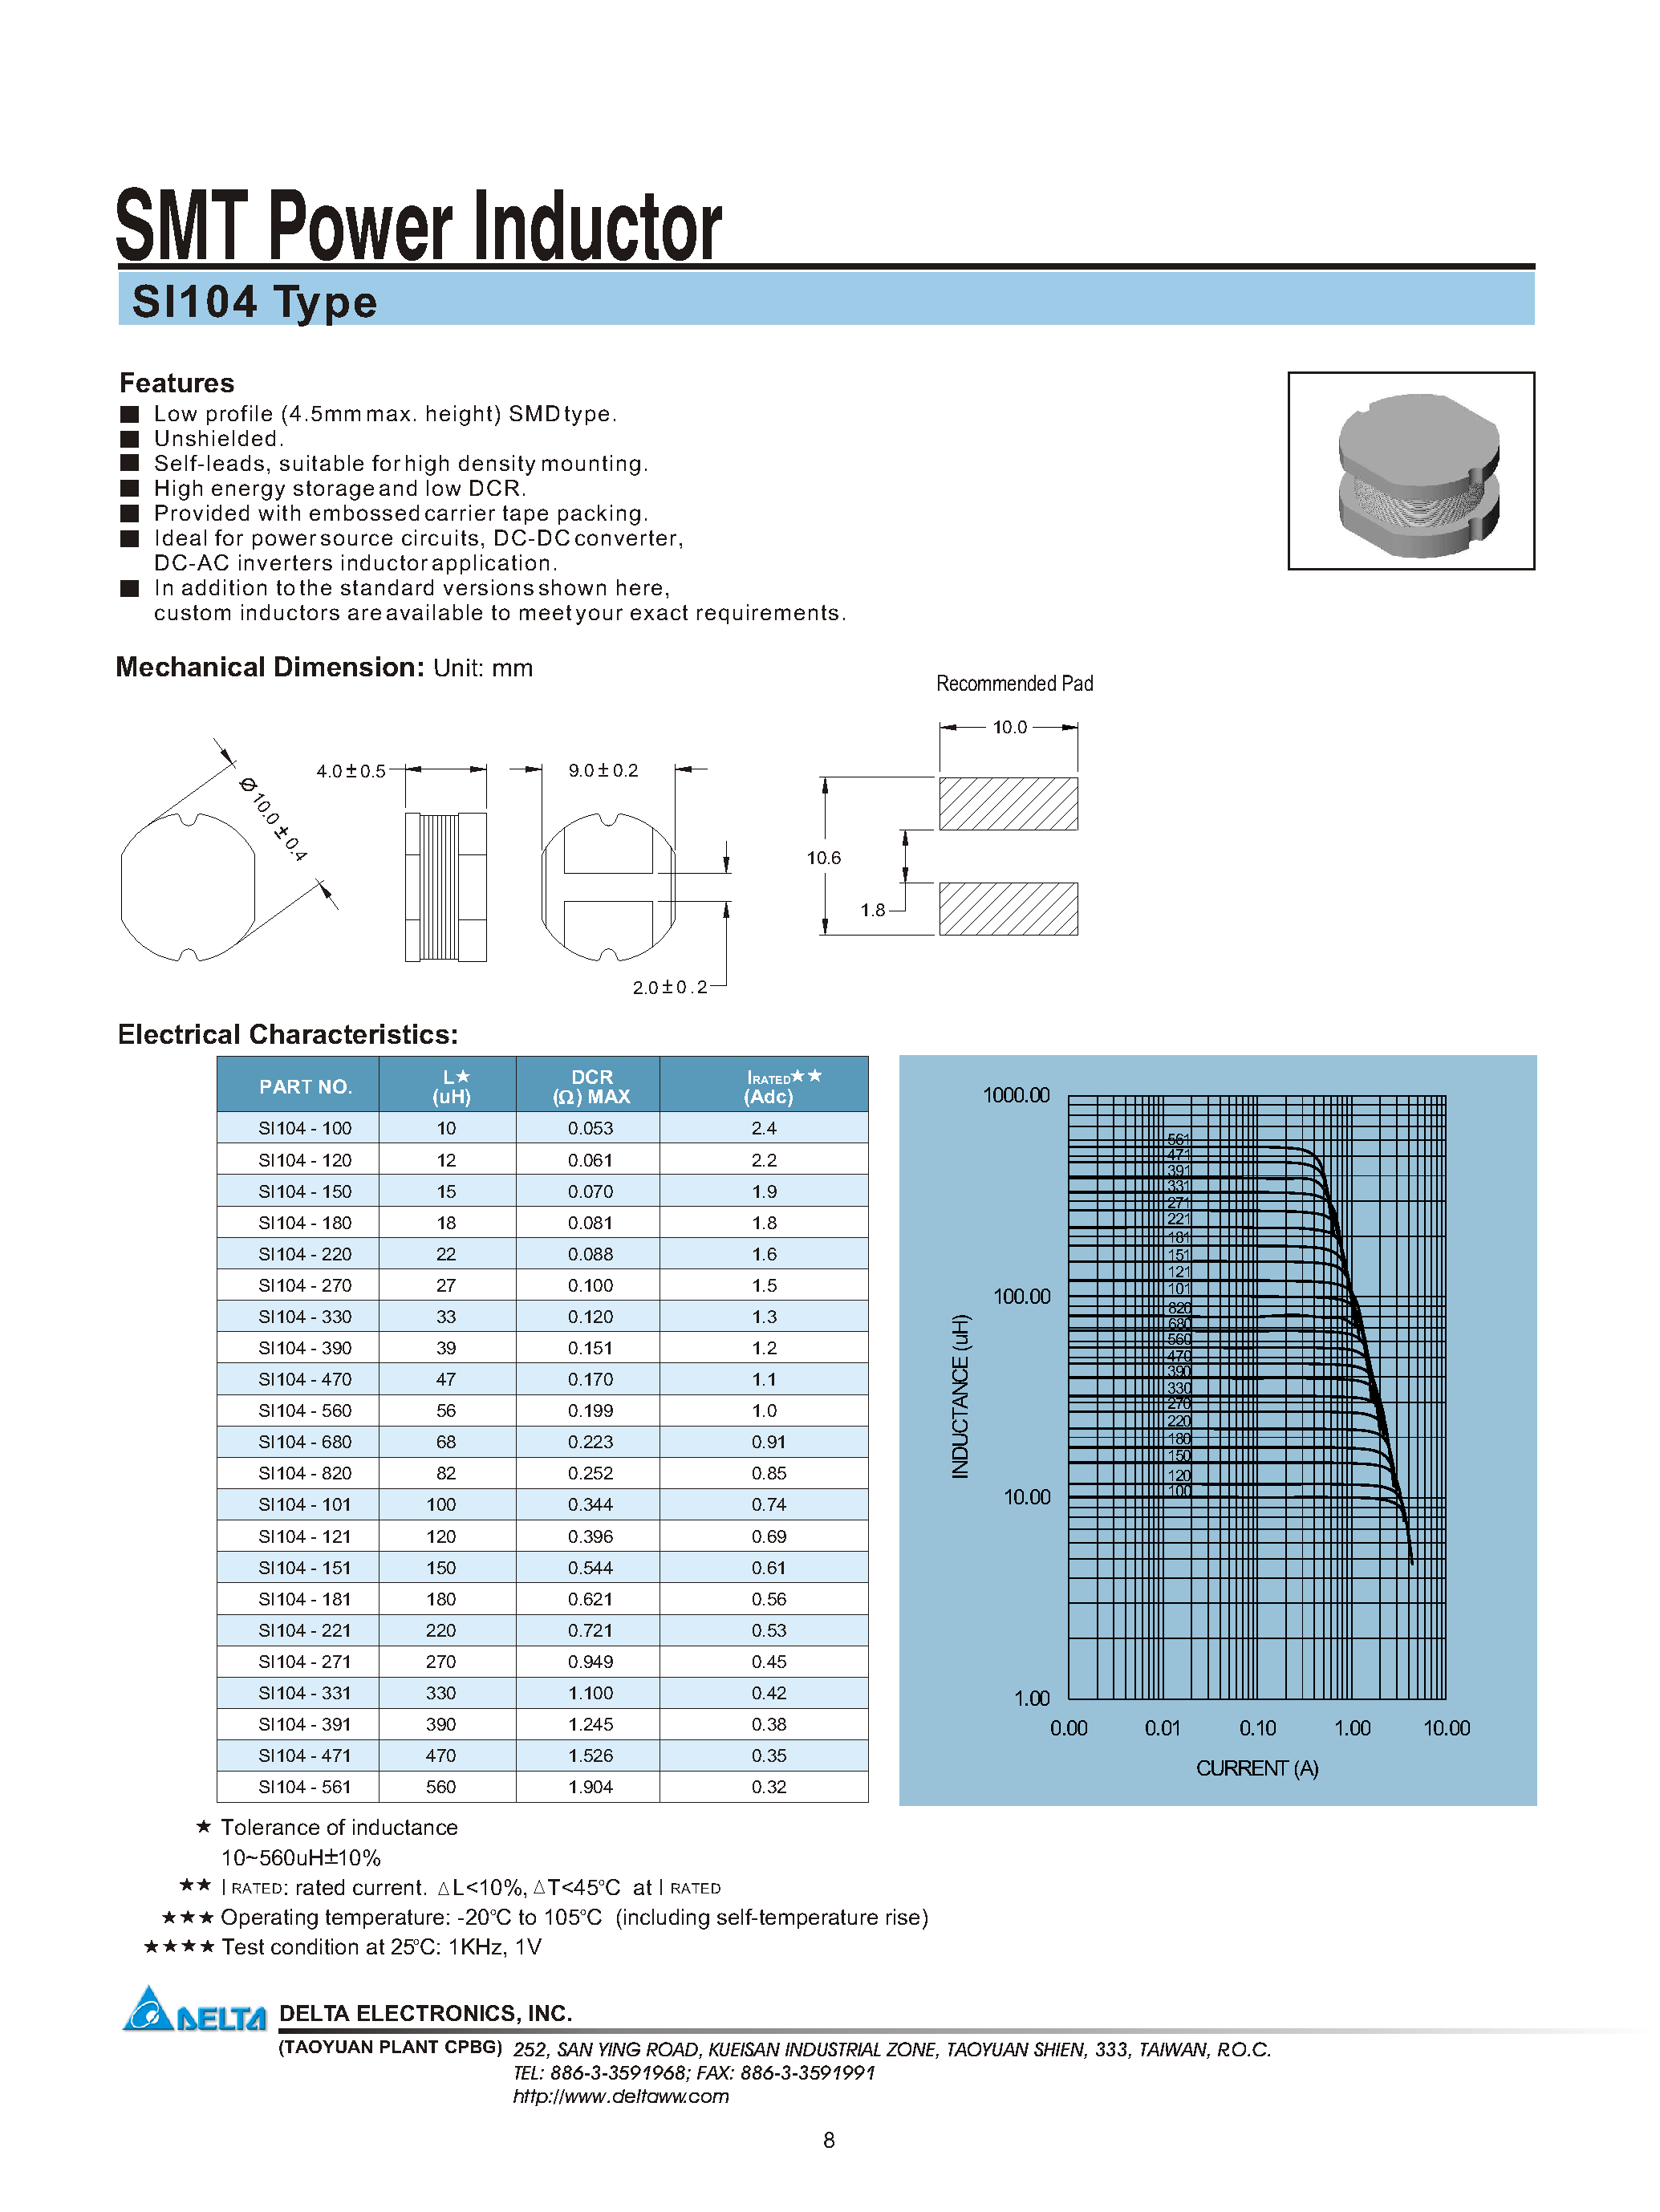 Datasheet SI104-560 - SMT Power Inductor page 1